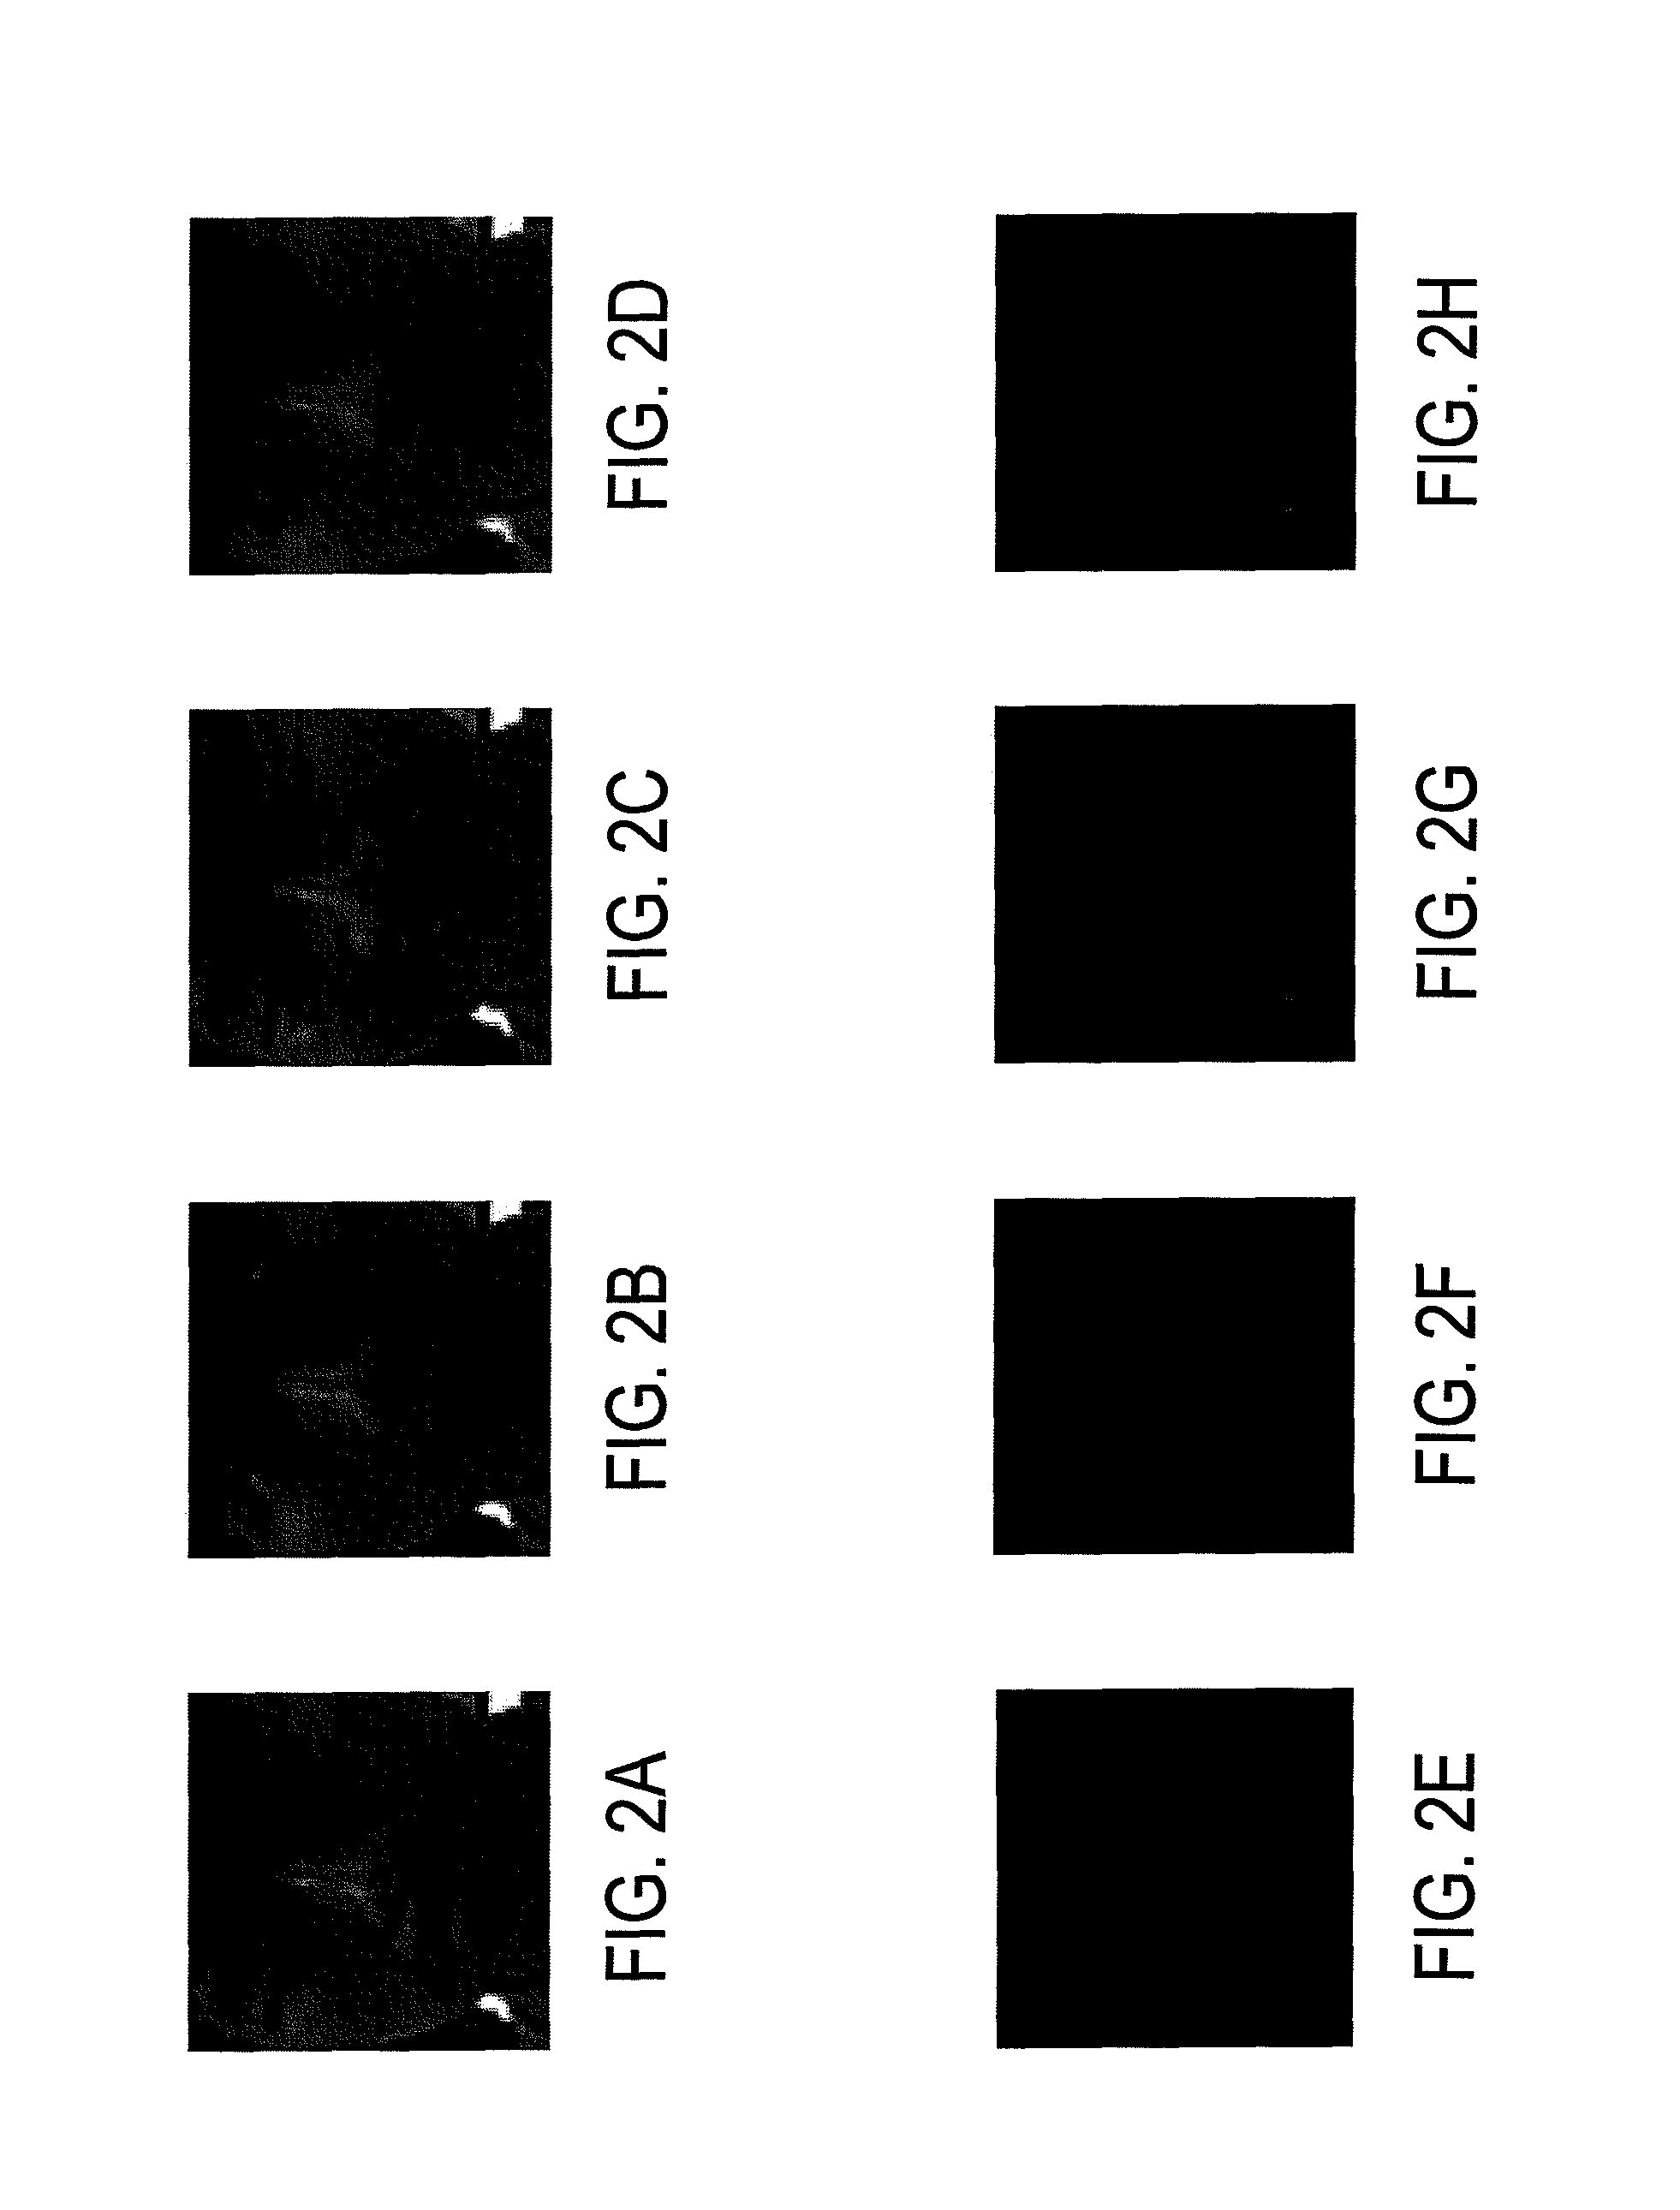 Ultra-low dimensional representation for face recognition under varying expressions